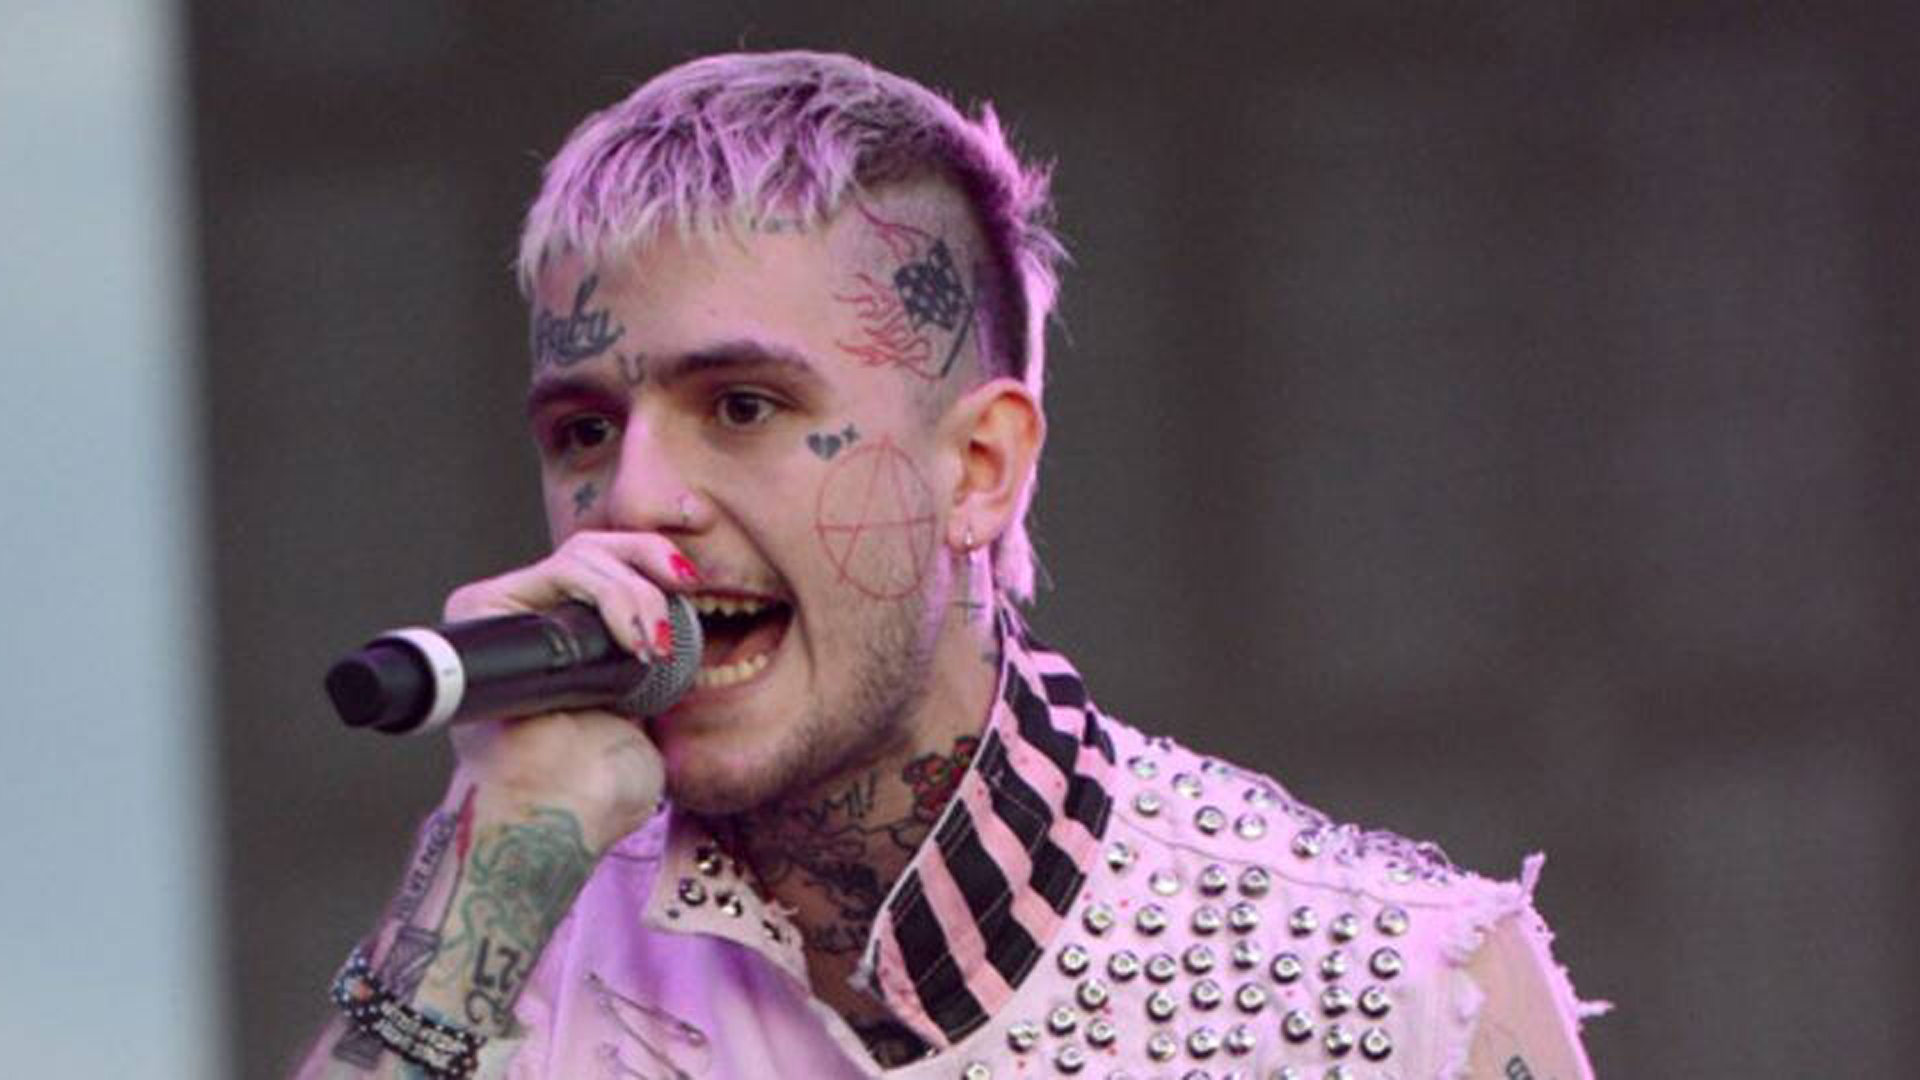 Pink Hair Lil Peep With Mike Is Wearing Pink Stone Shirt HD Lil Peep